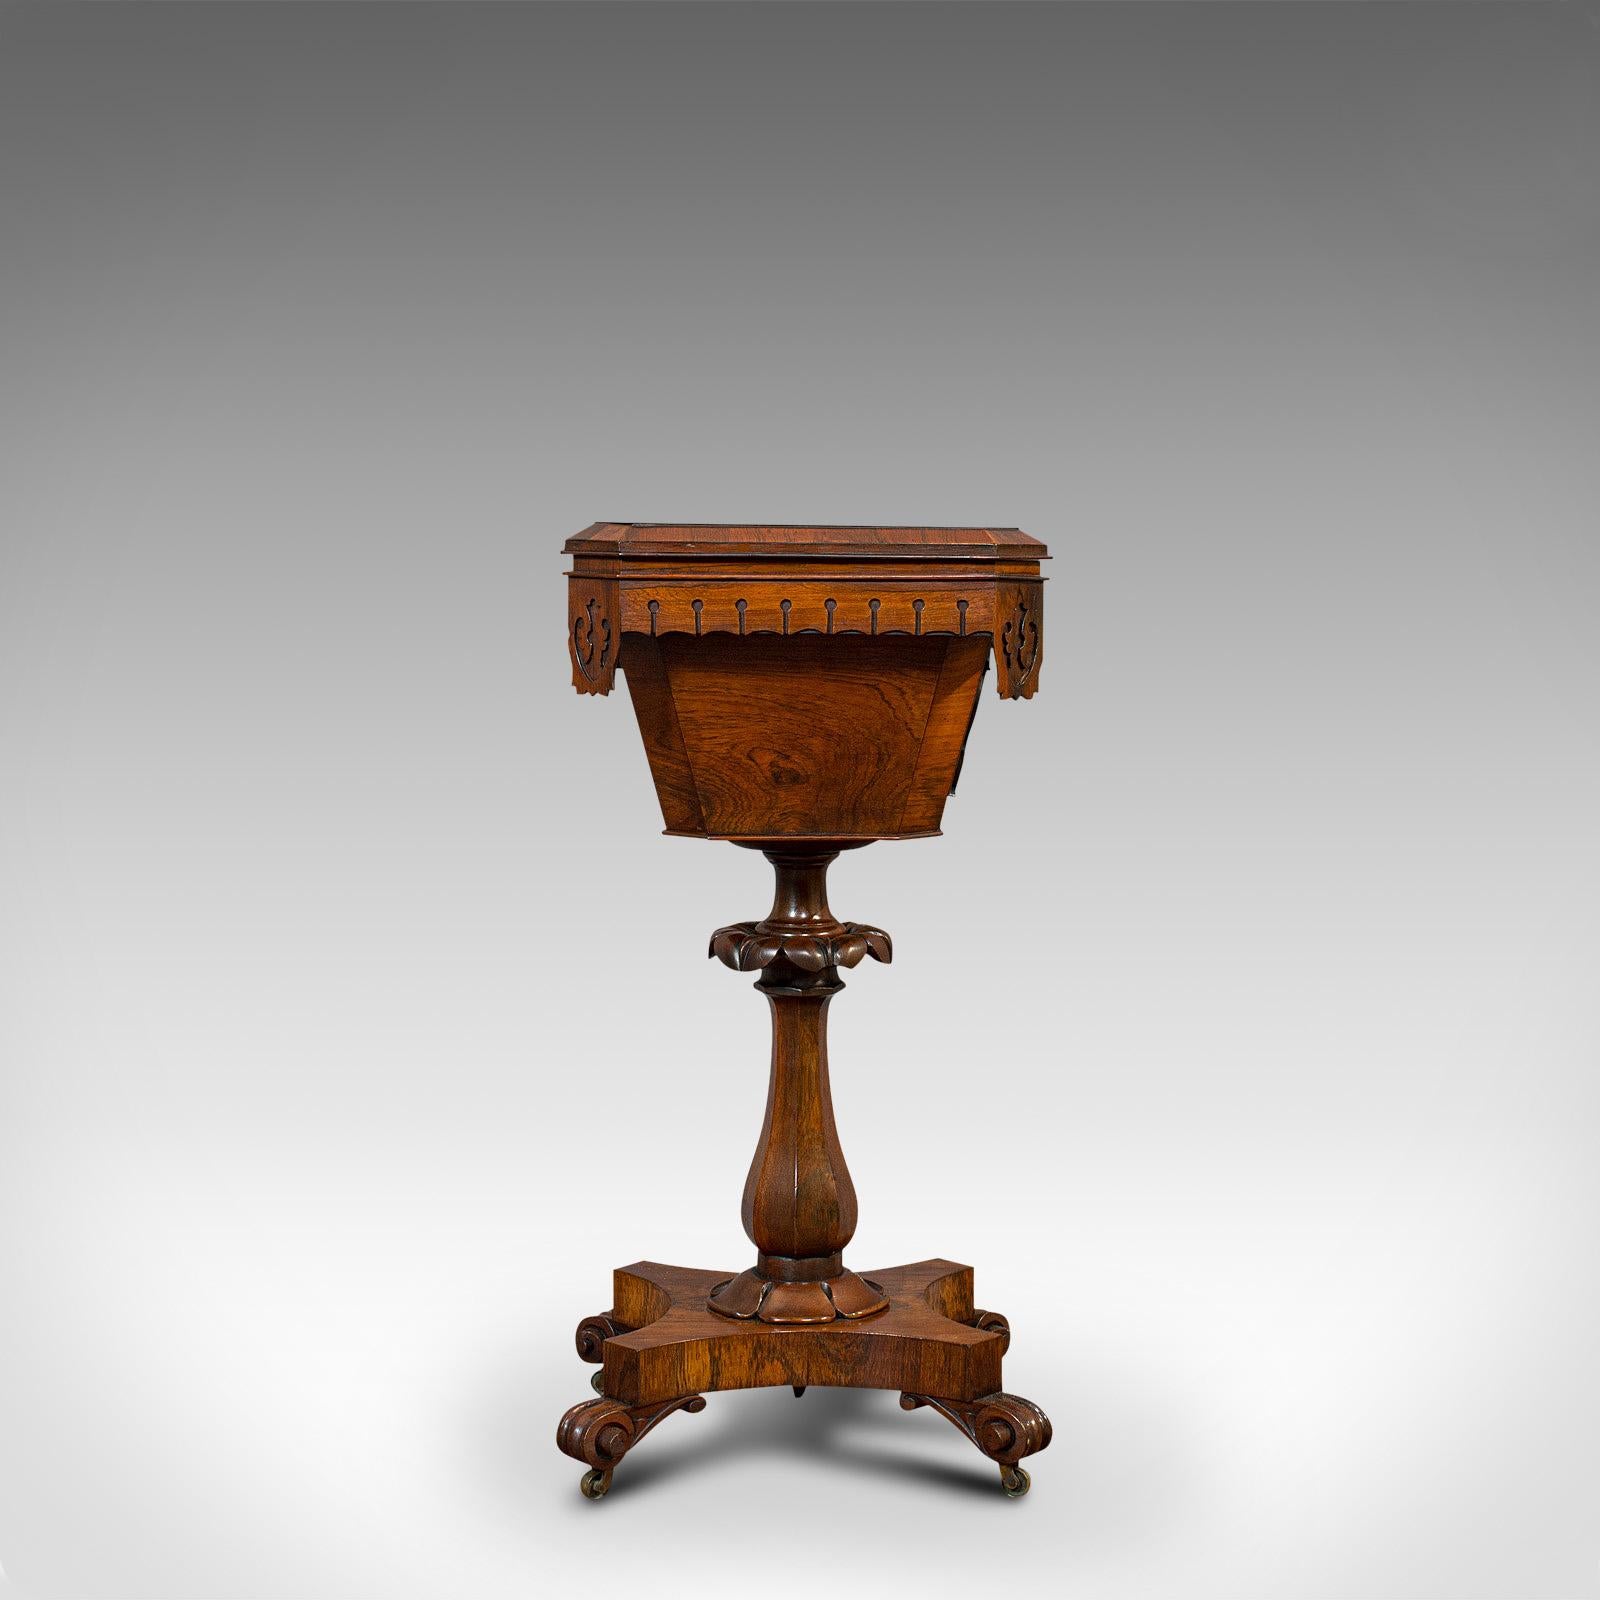 19th Century Antique Lady's Work Box, English, Rosewood, Sewing, Table, Regency, circa 1820